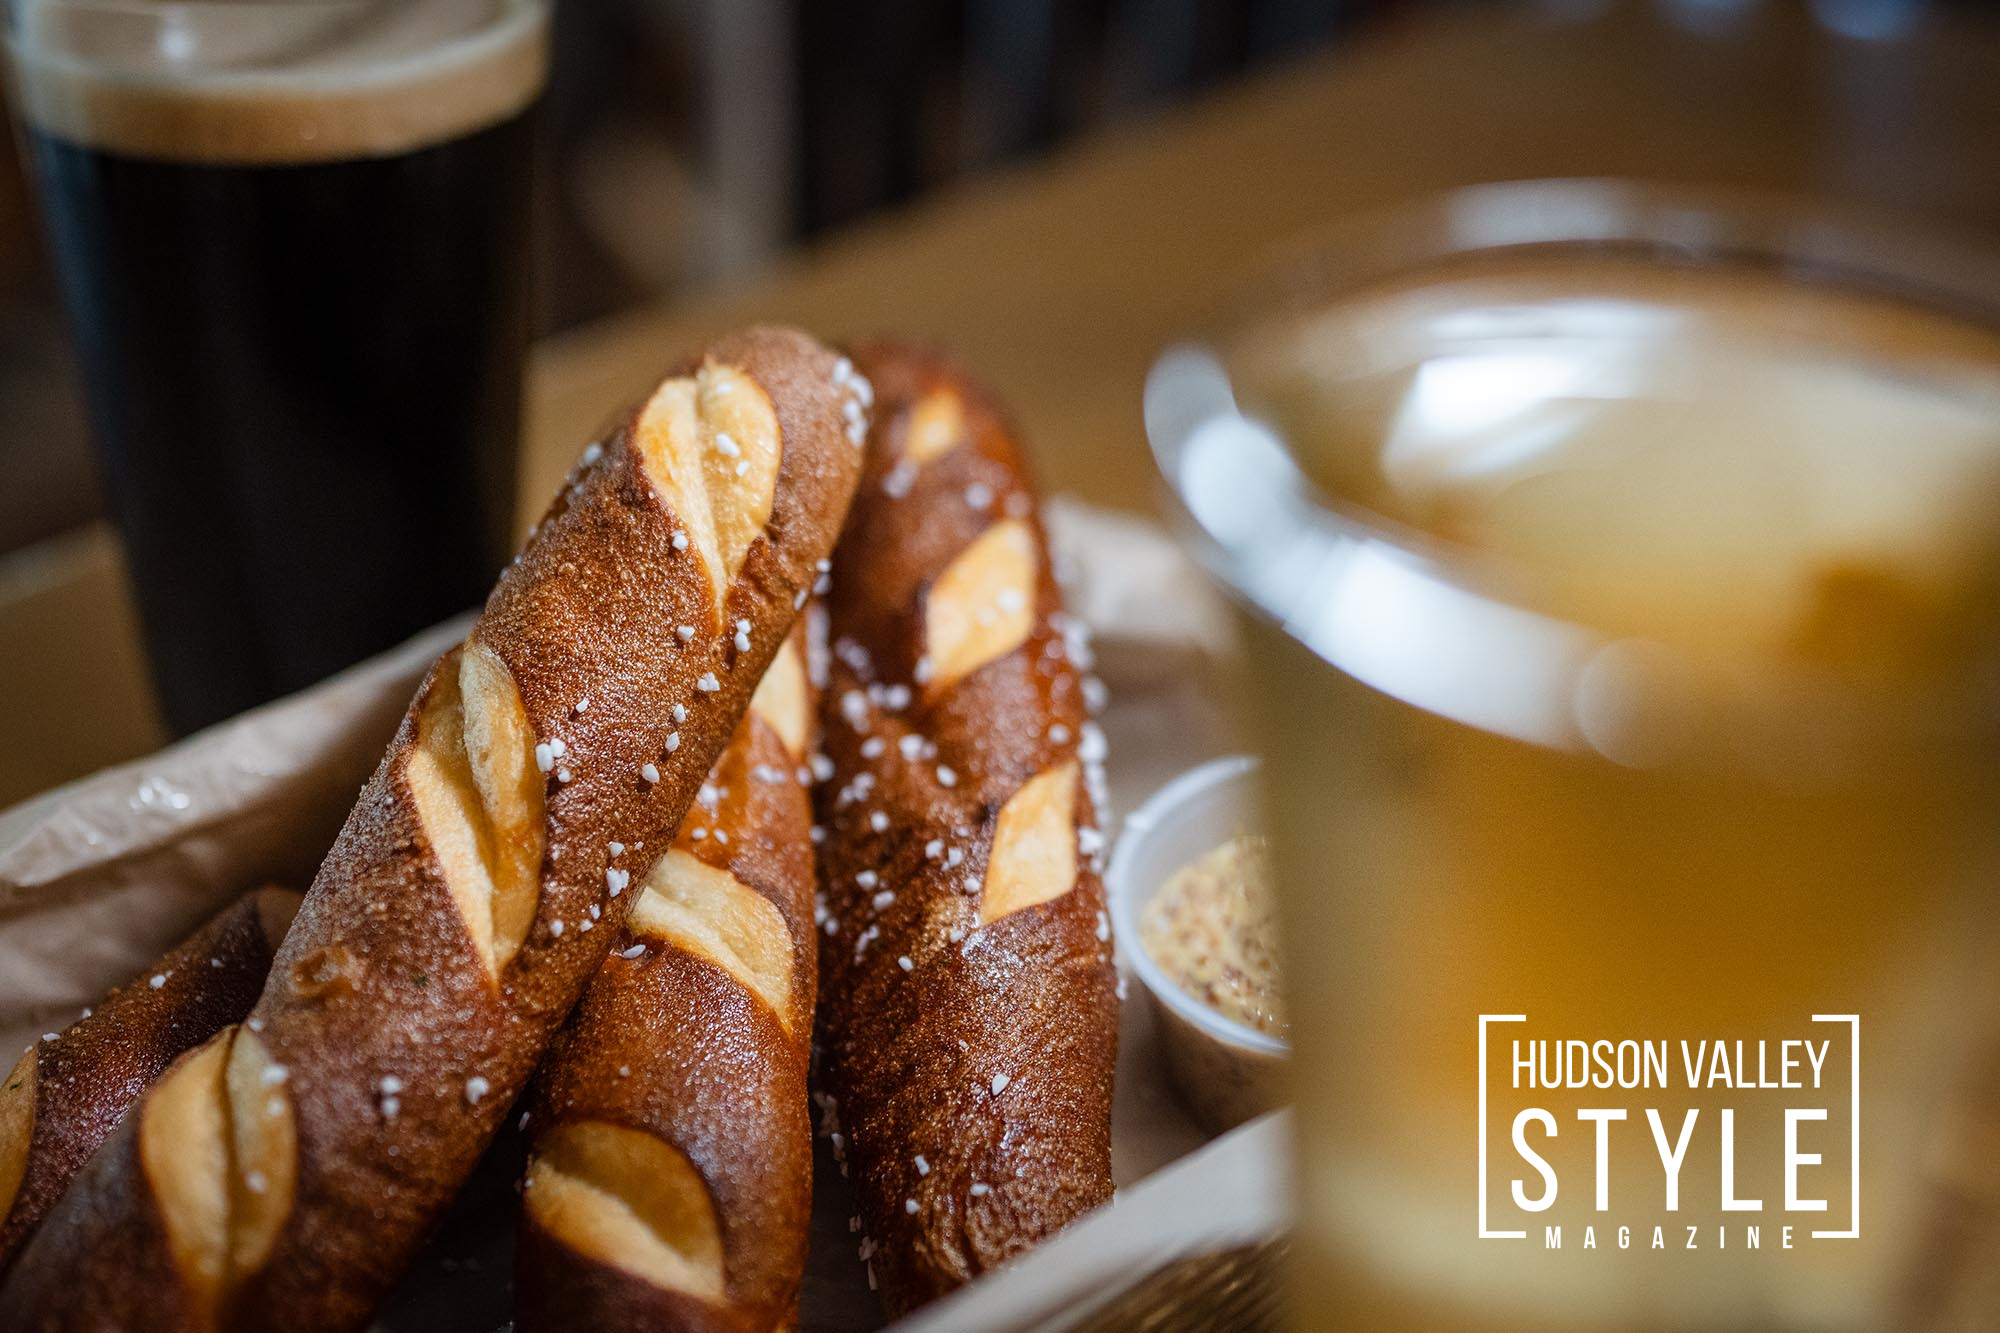 From Pretzels to Stouts: A Taste Tour of Clemson Brothers Brewery in New Paltz, NY – Restaurant Reviews with Photographer Maxwell Alexander